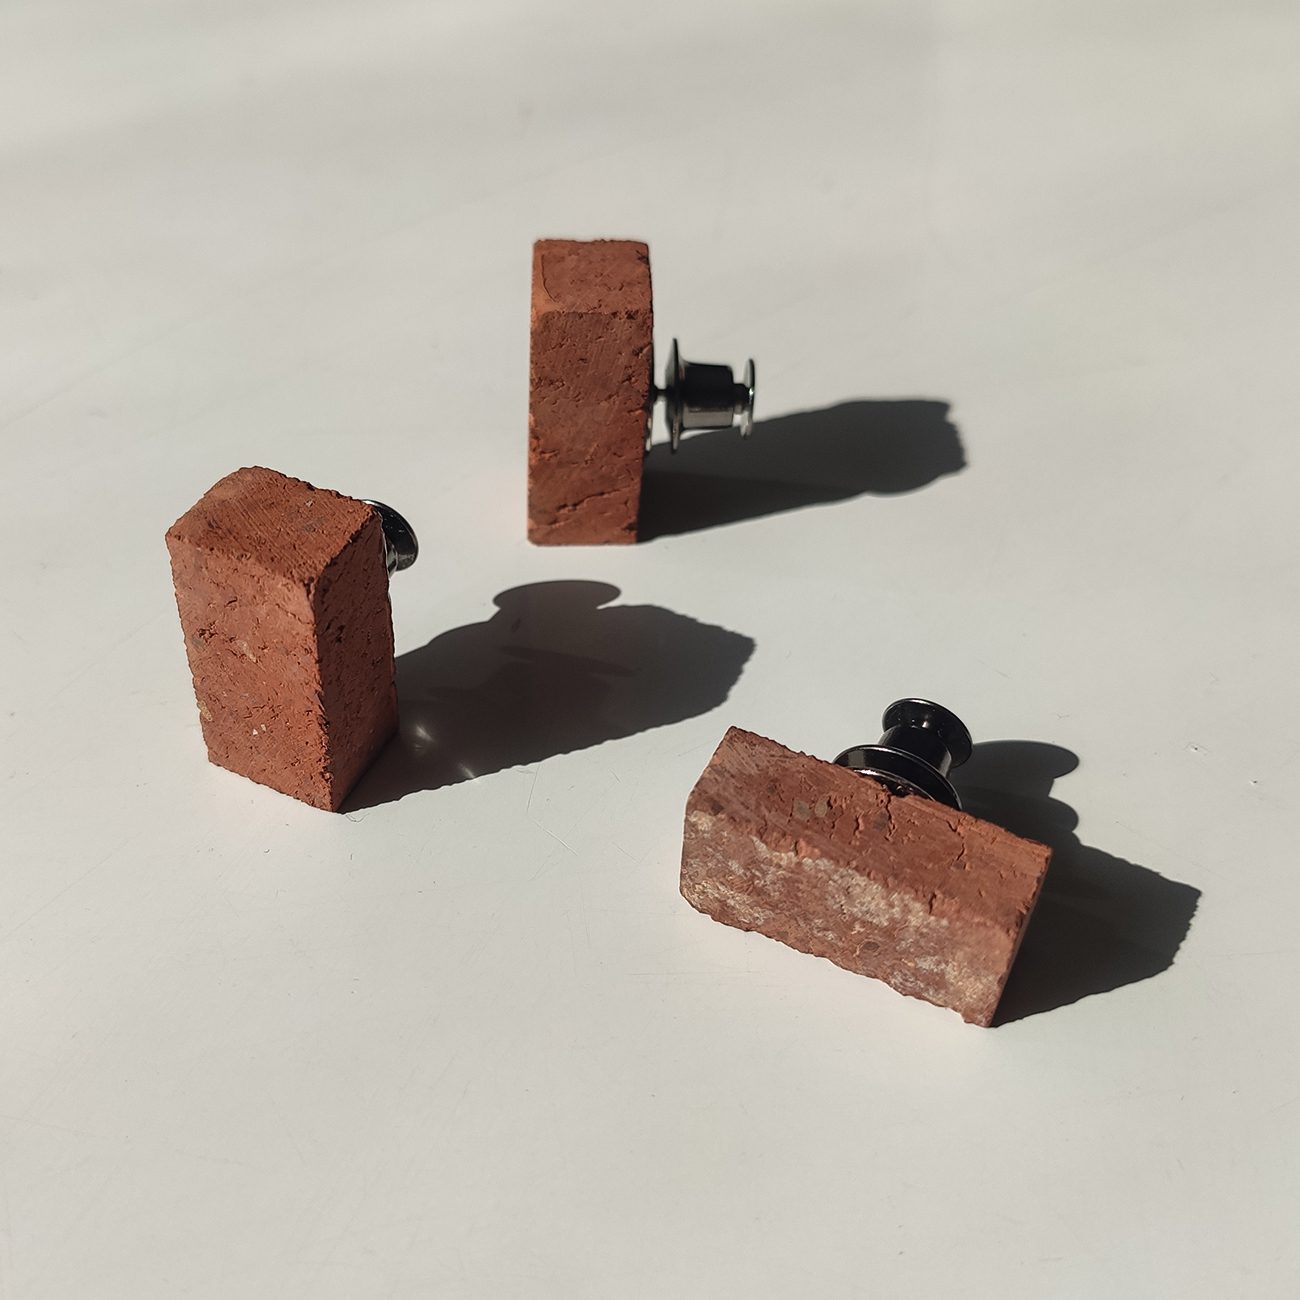 3 little red brick pins on an off white background